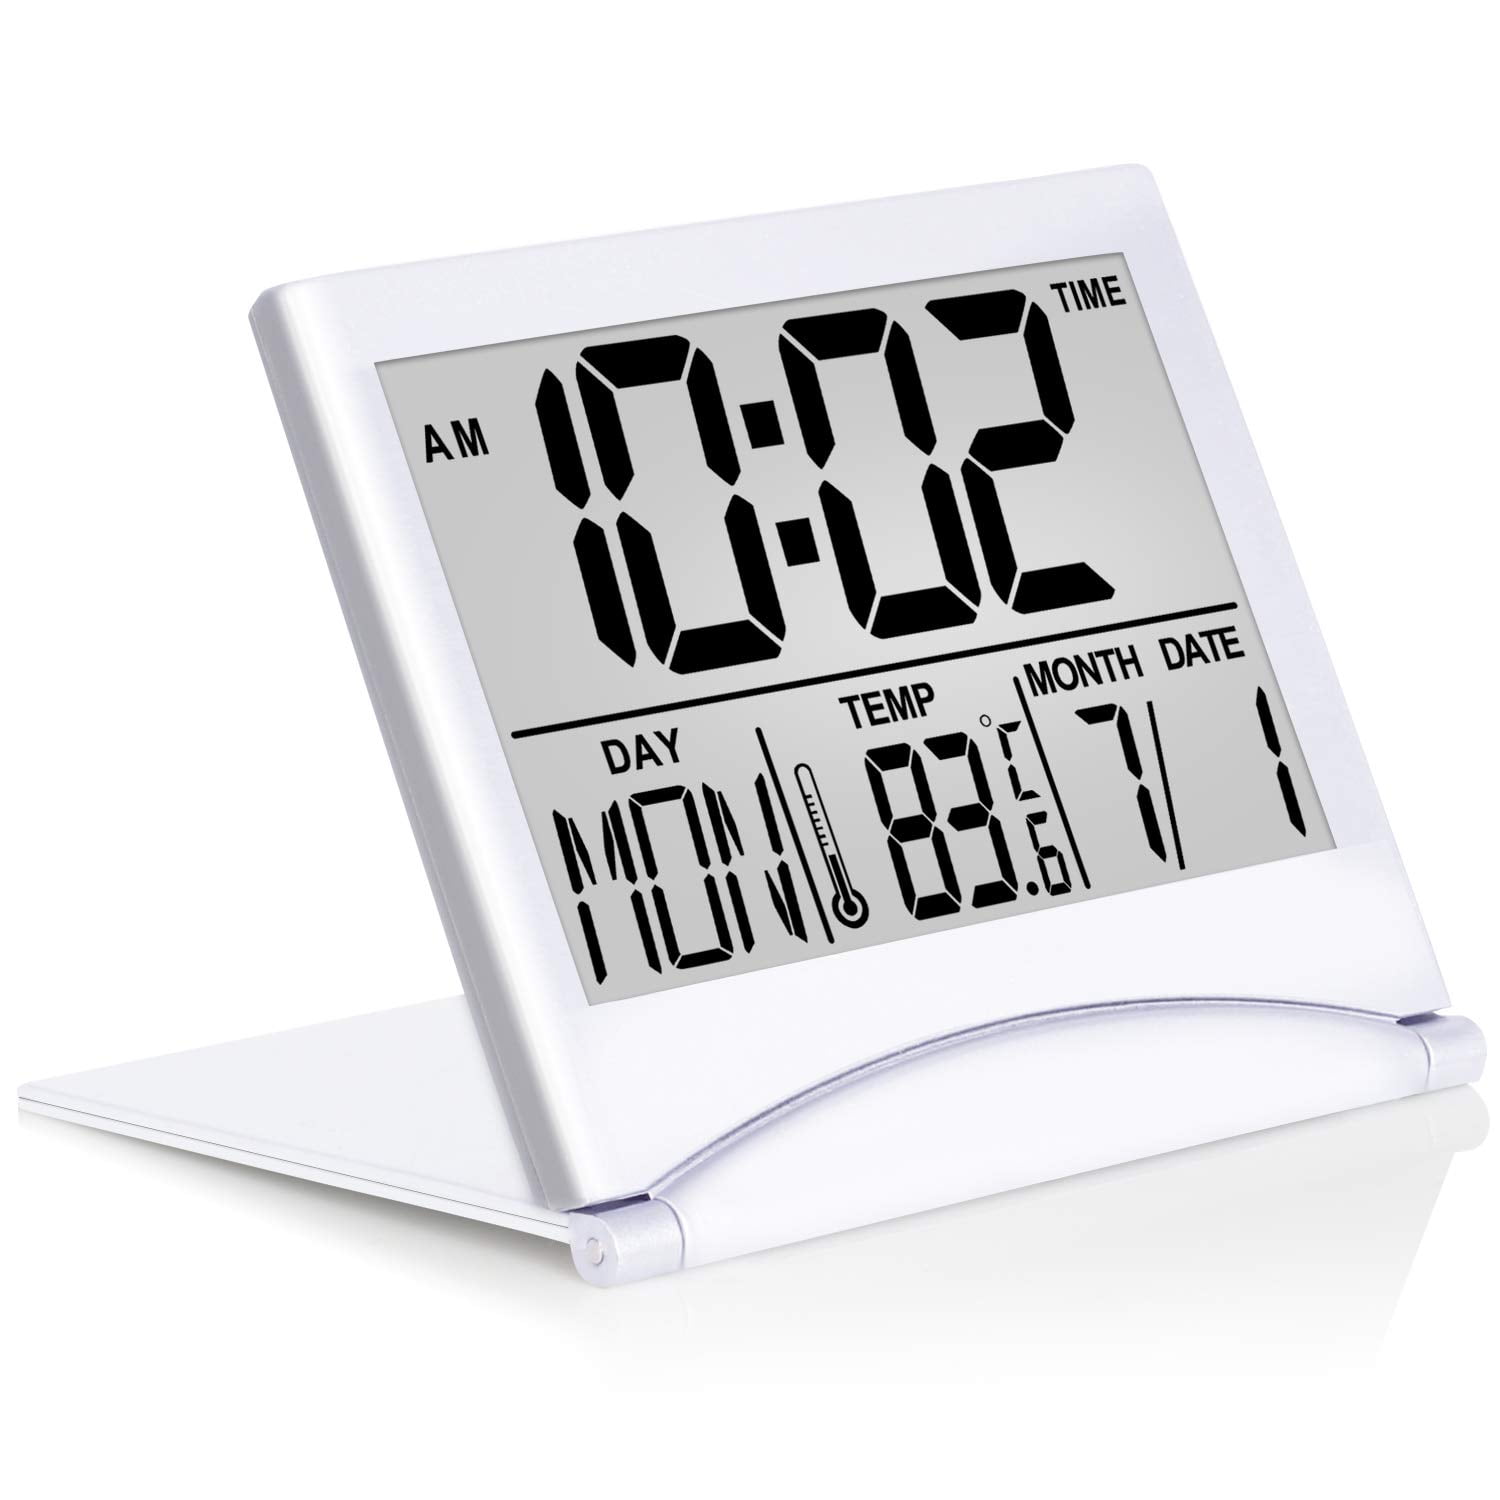 Betus Digital Travel Alarm Clock - Foldable Calendar &amp; Temperature &amp; Timer LCD Clock with Snooze Mode - Large Number Display, Battery Operated - Compact Desk Clock for All Ages (Silver)